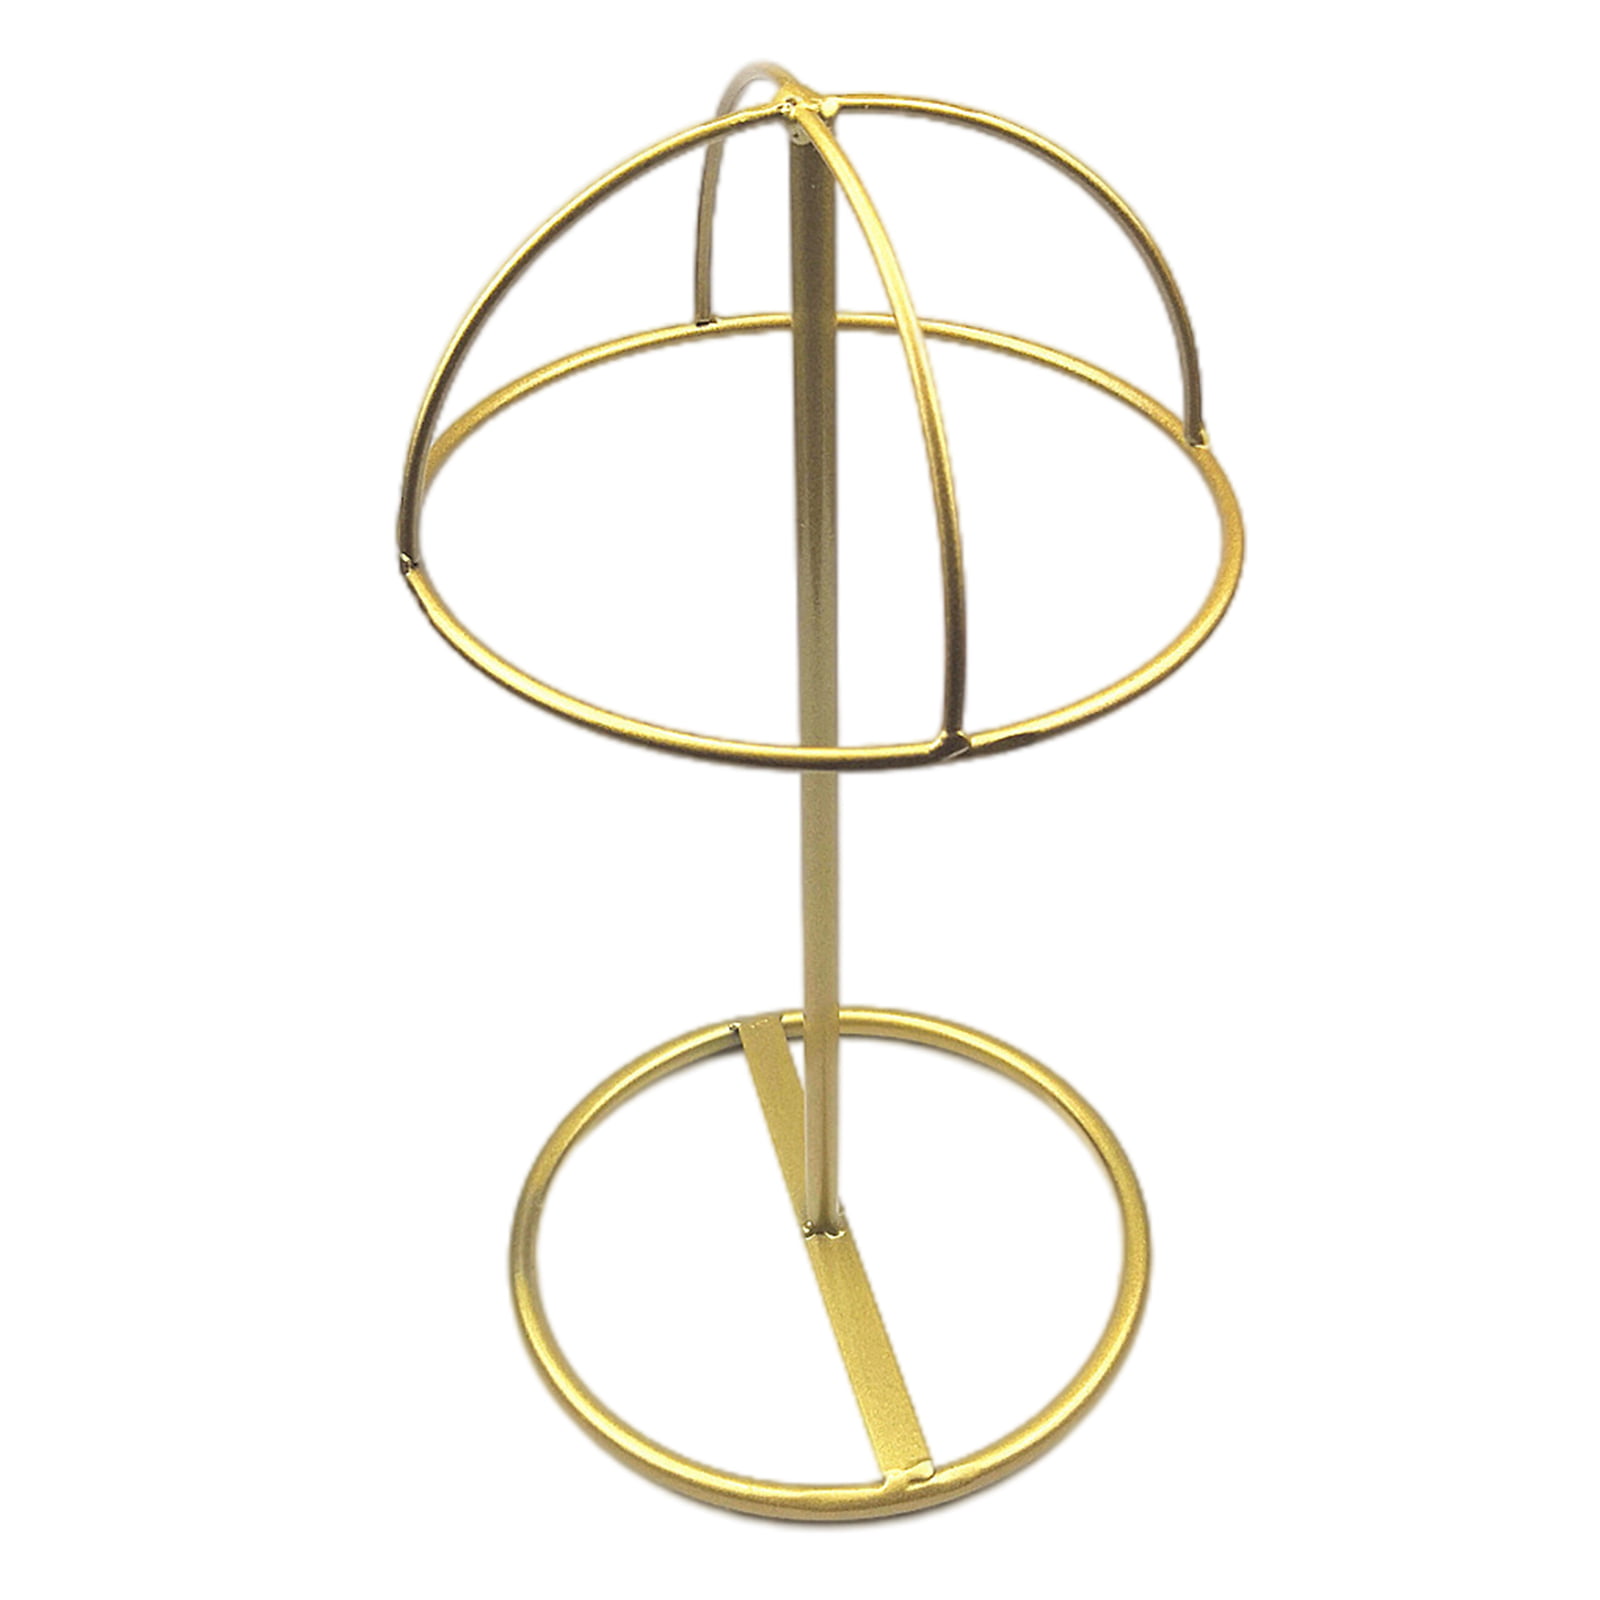 Hat Millinery Round Stand Retail Store Floor Display Rack 5 Levels 20 Caps 